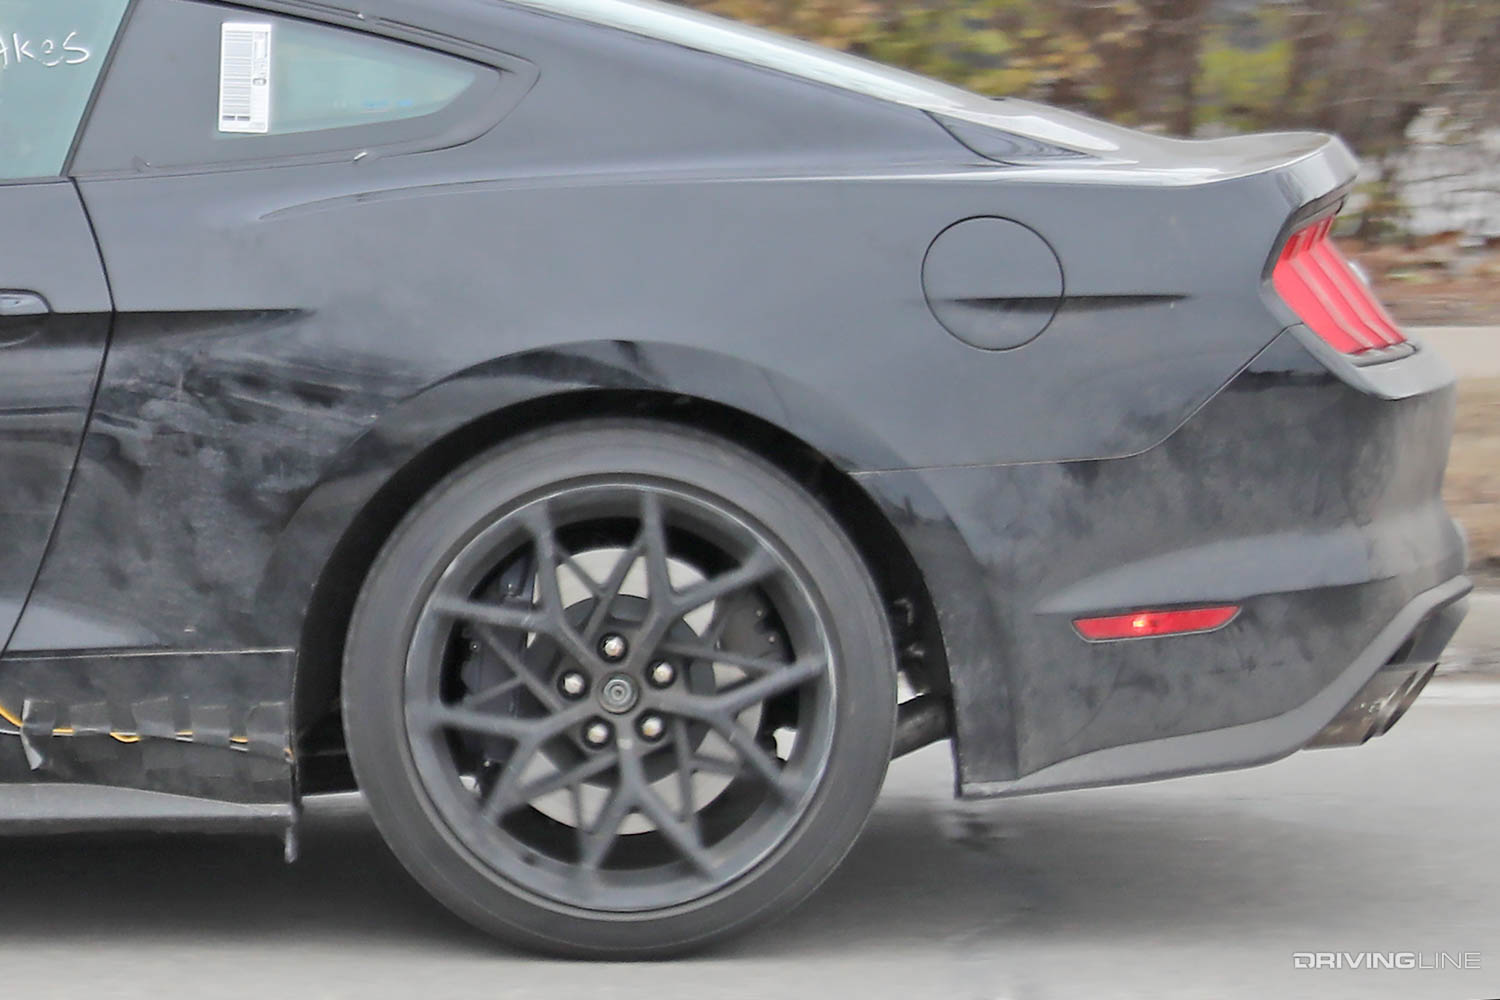 Spy Photo: New, 2023 S650 Ford Mustang GT